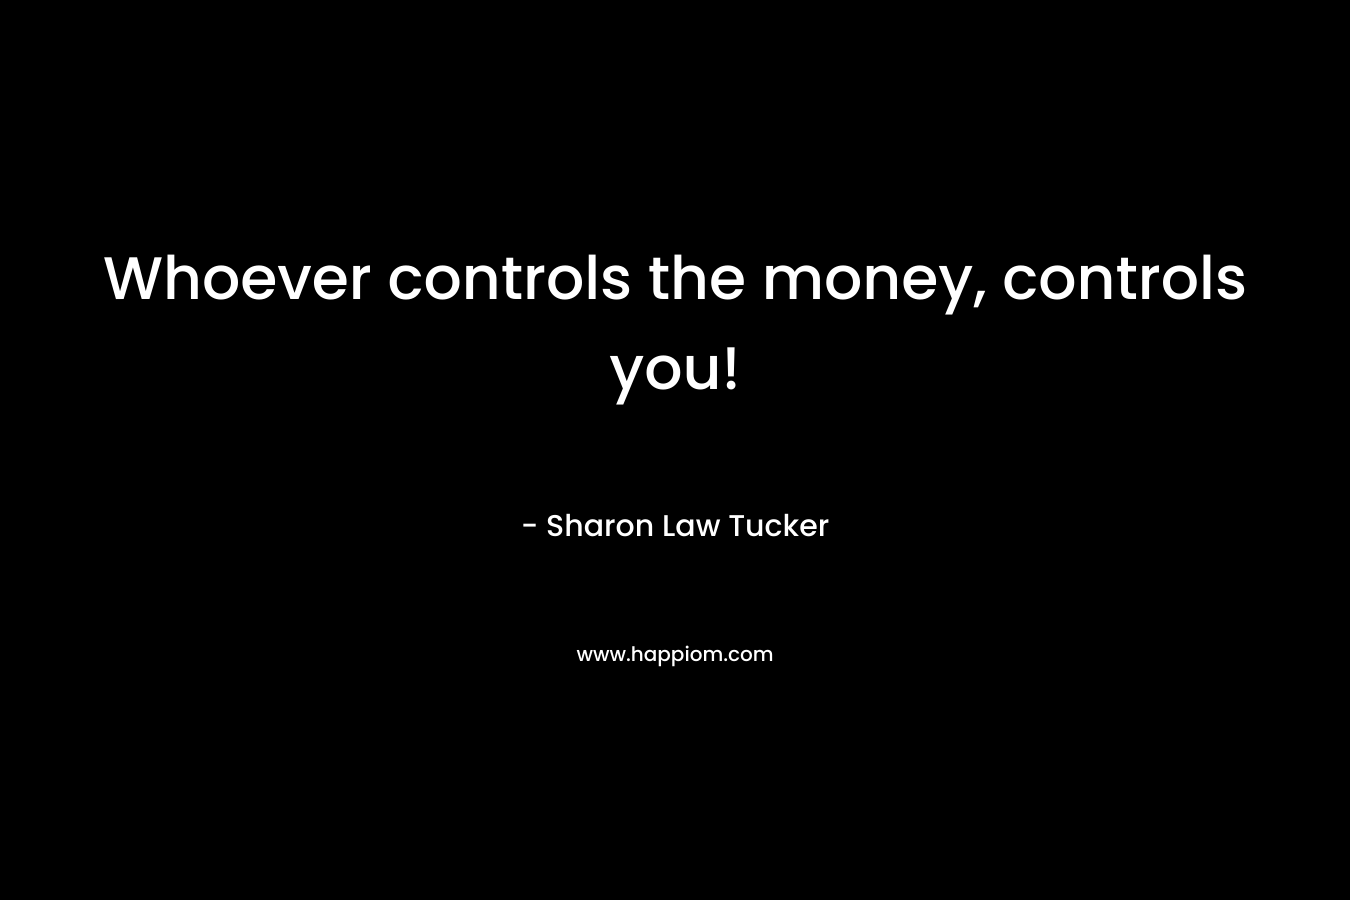 Whoever controls the money, controls you!